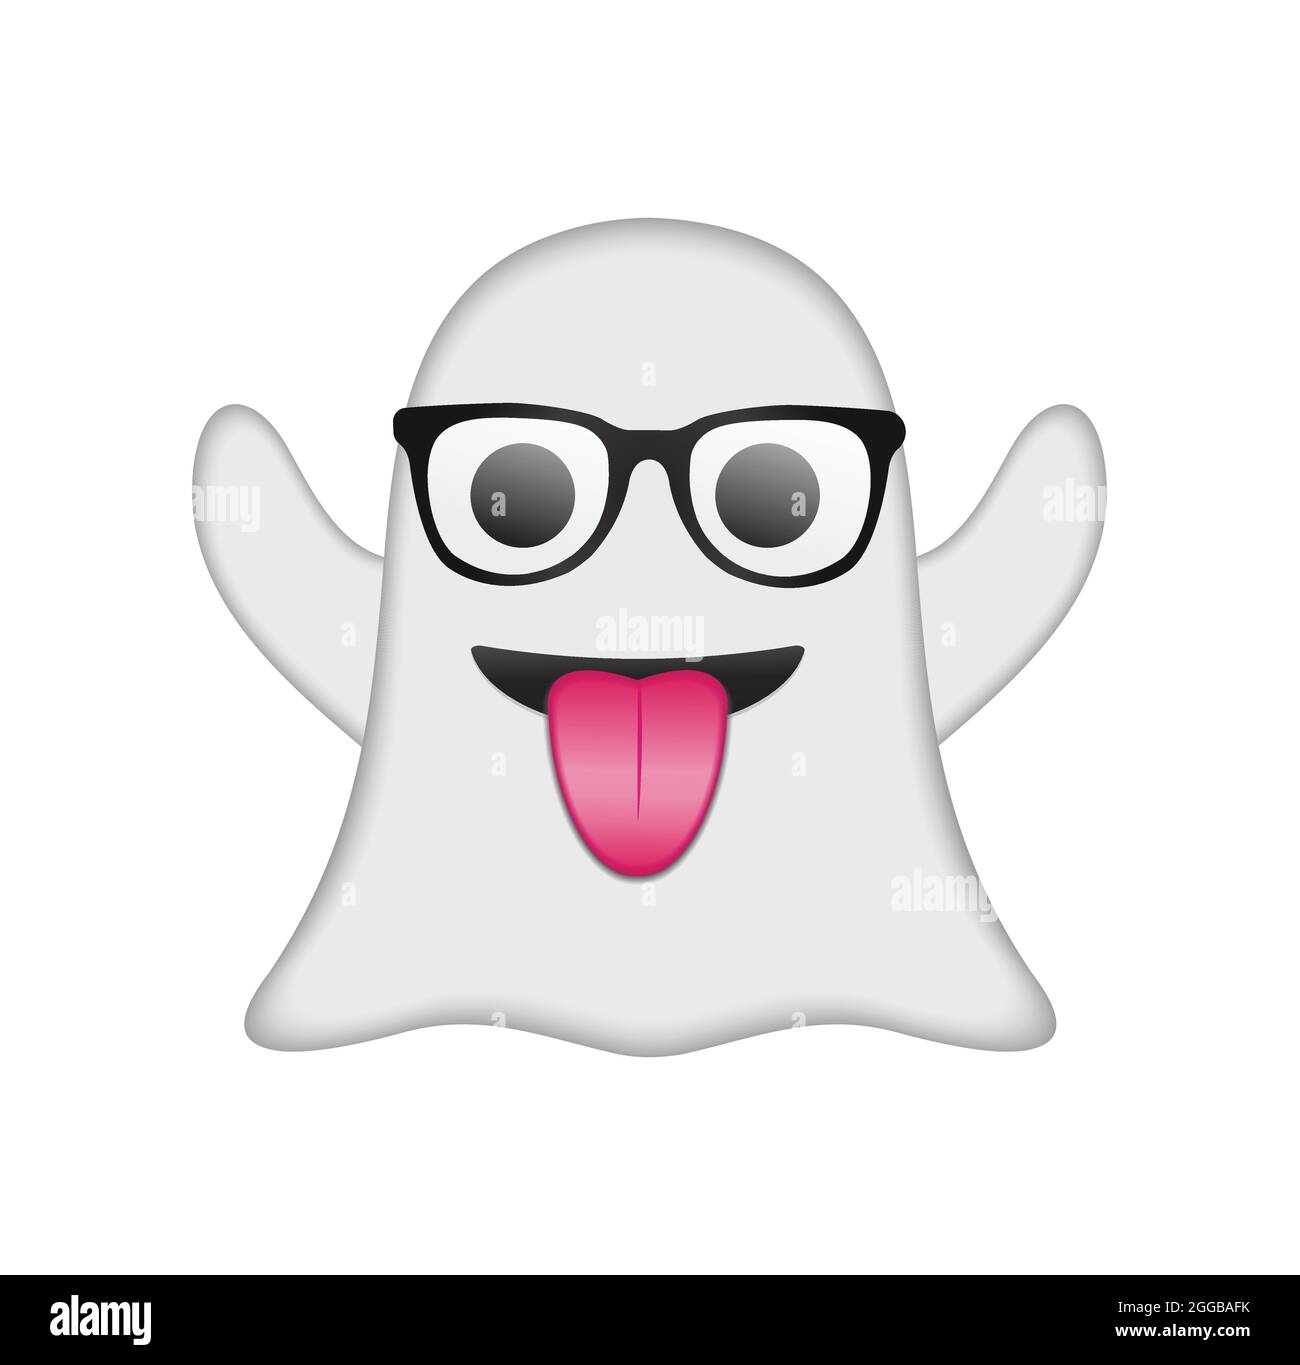 Ghost emoji vector illustration isolated. Halloween ghost emoticon on white background. Stock Vector